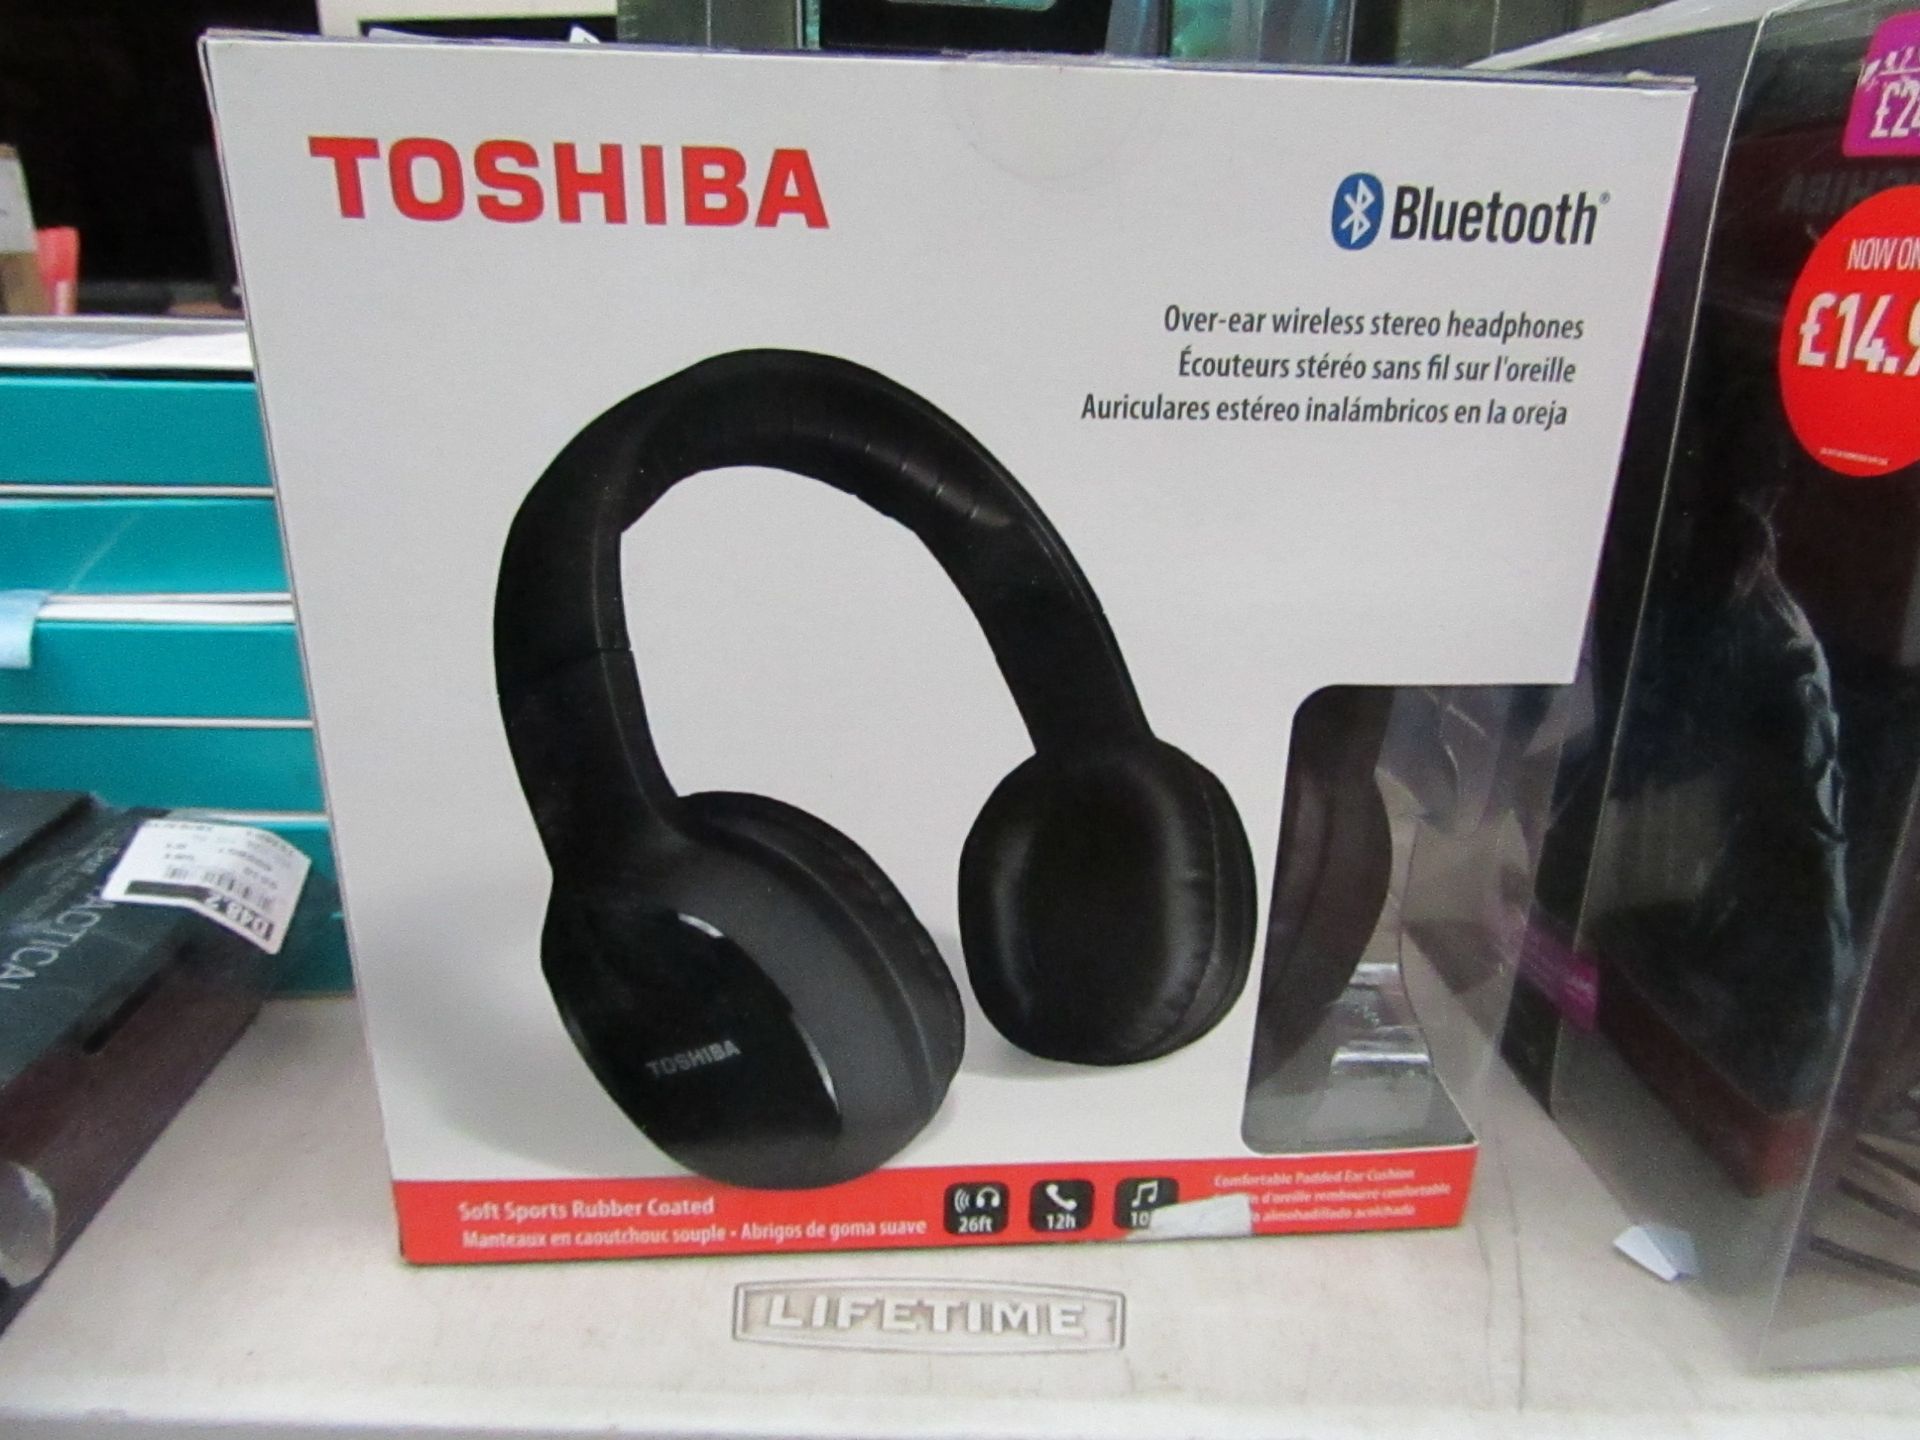 Toshiba Bluetooth headphones, untested and boxed.